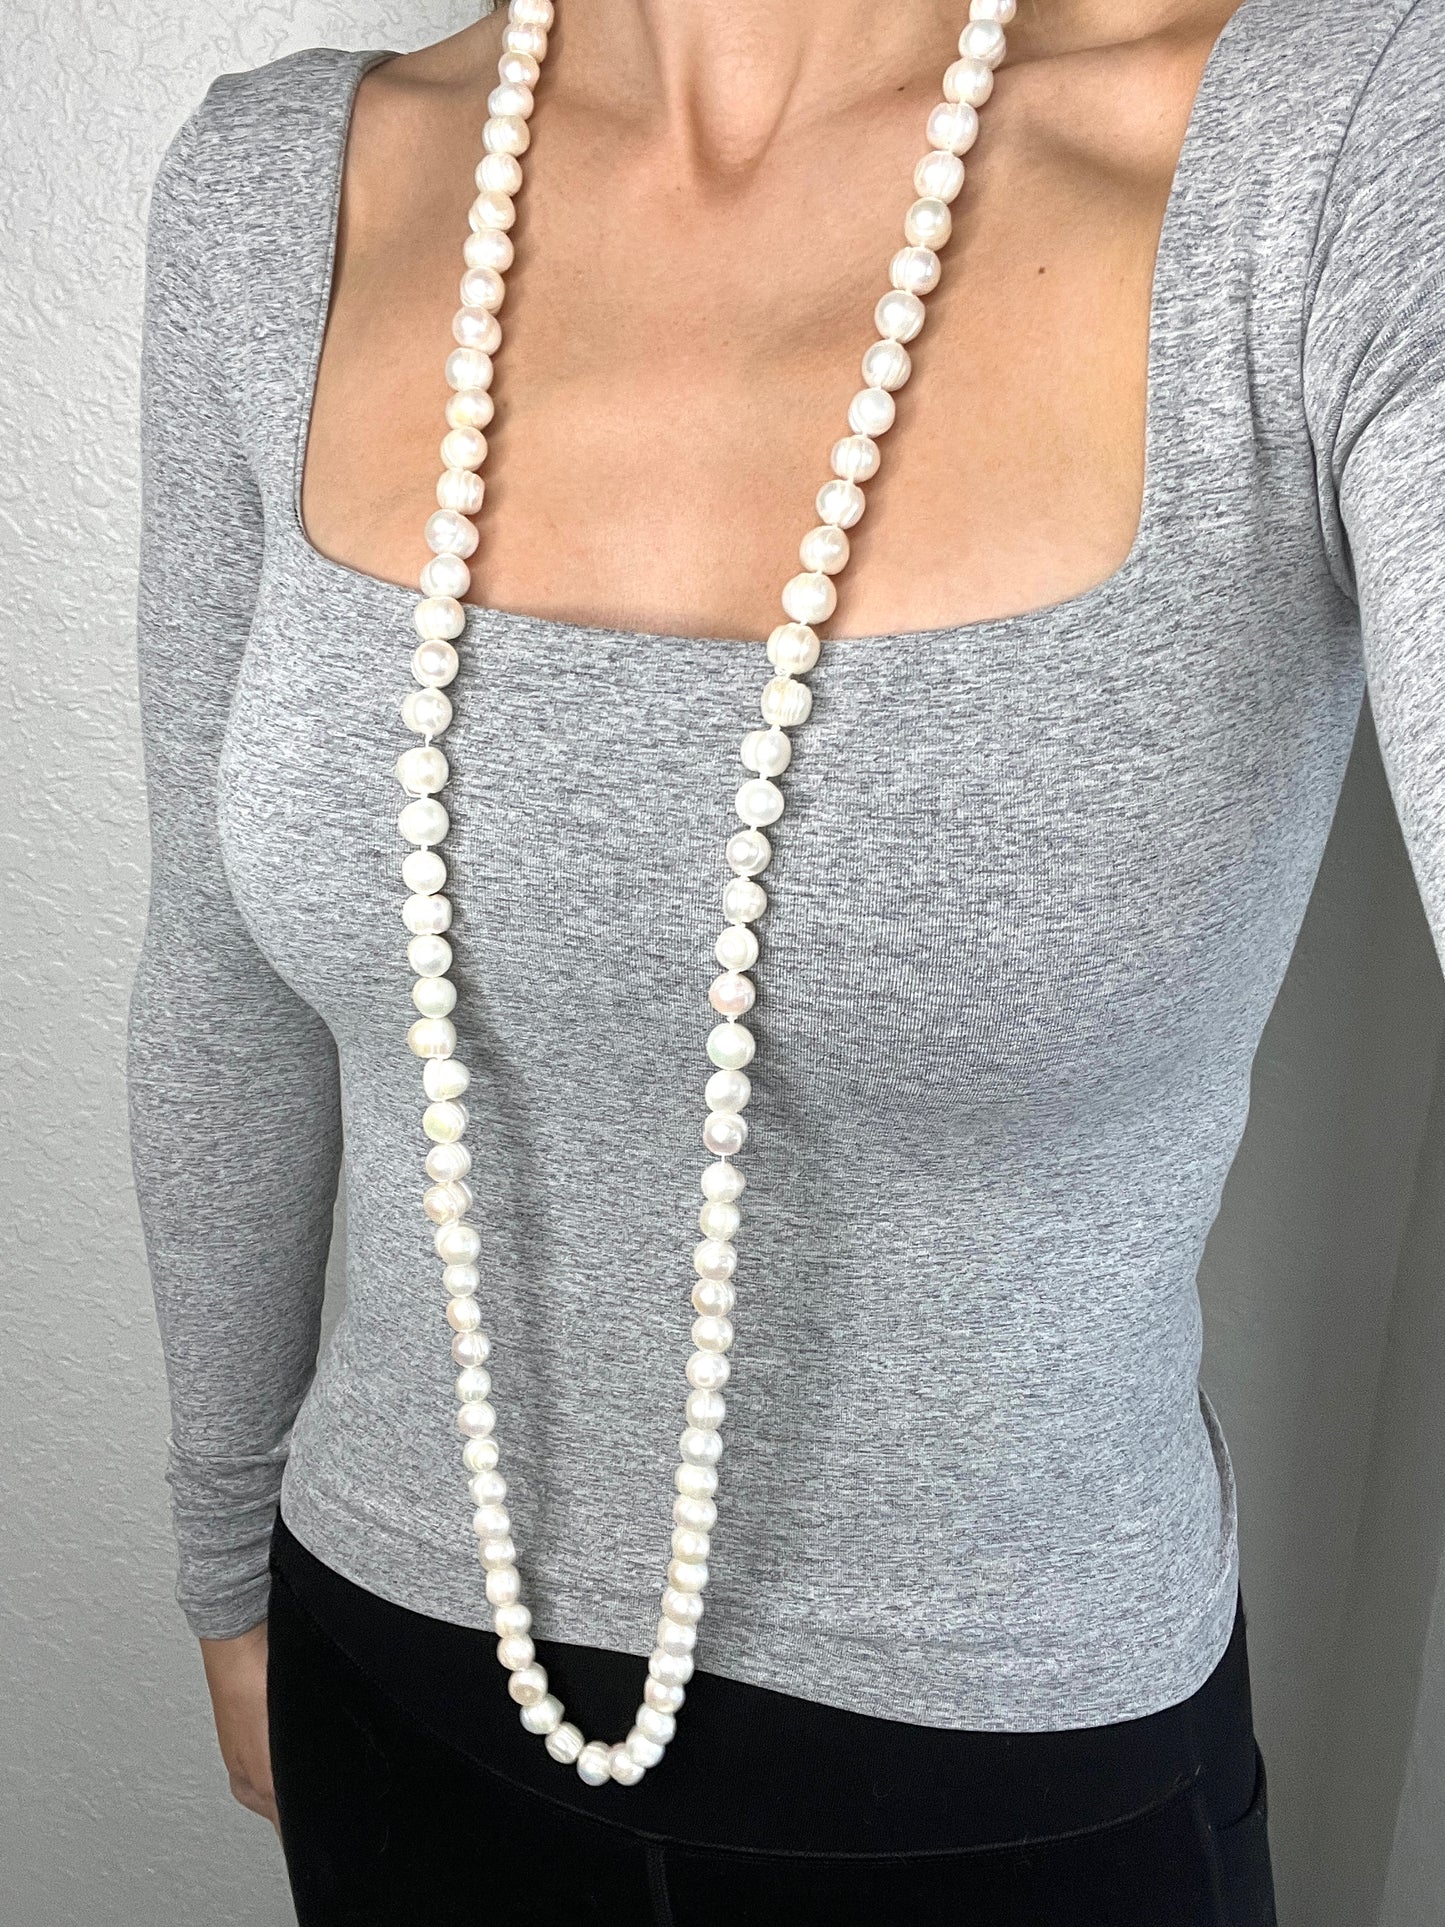 Long Classic Pearl Necklace - Born To Glam